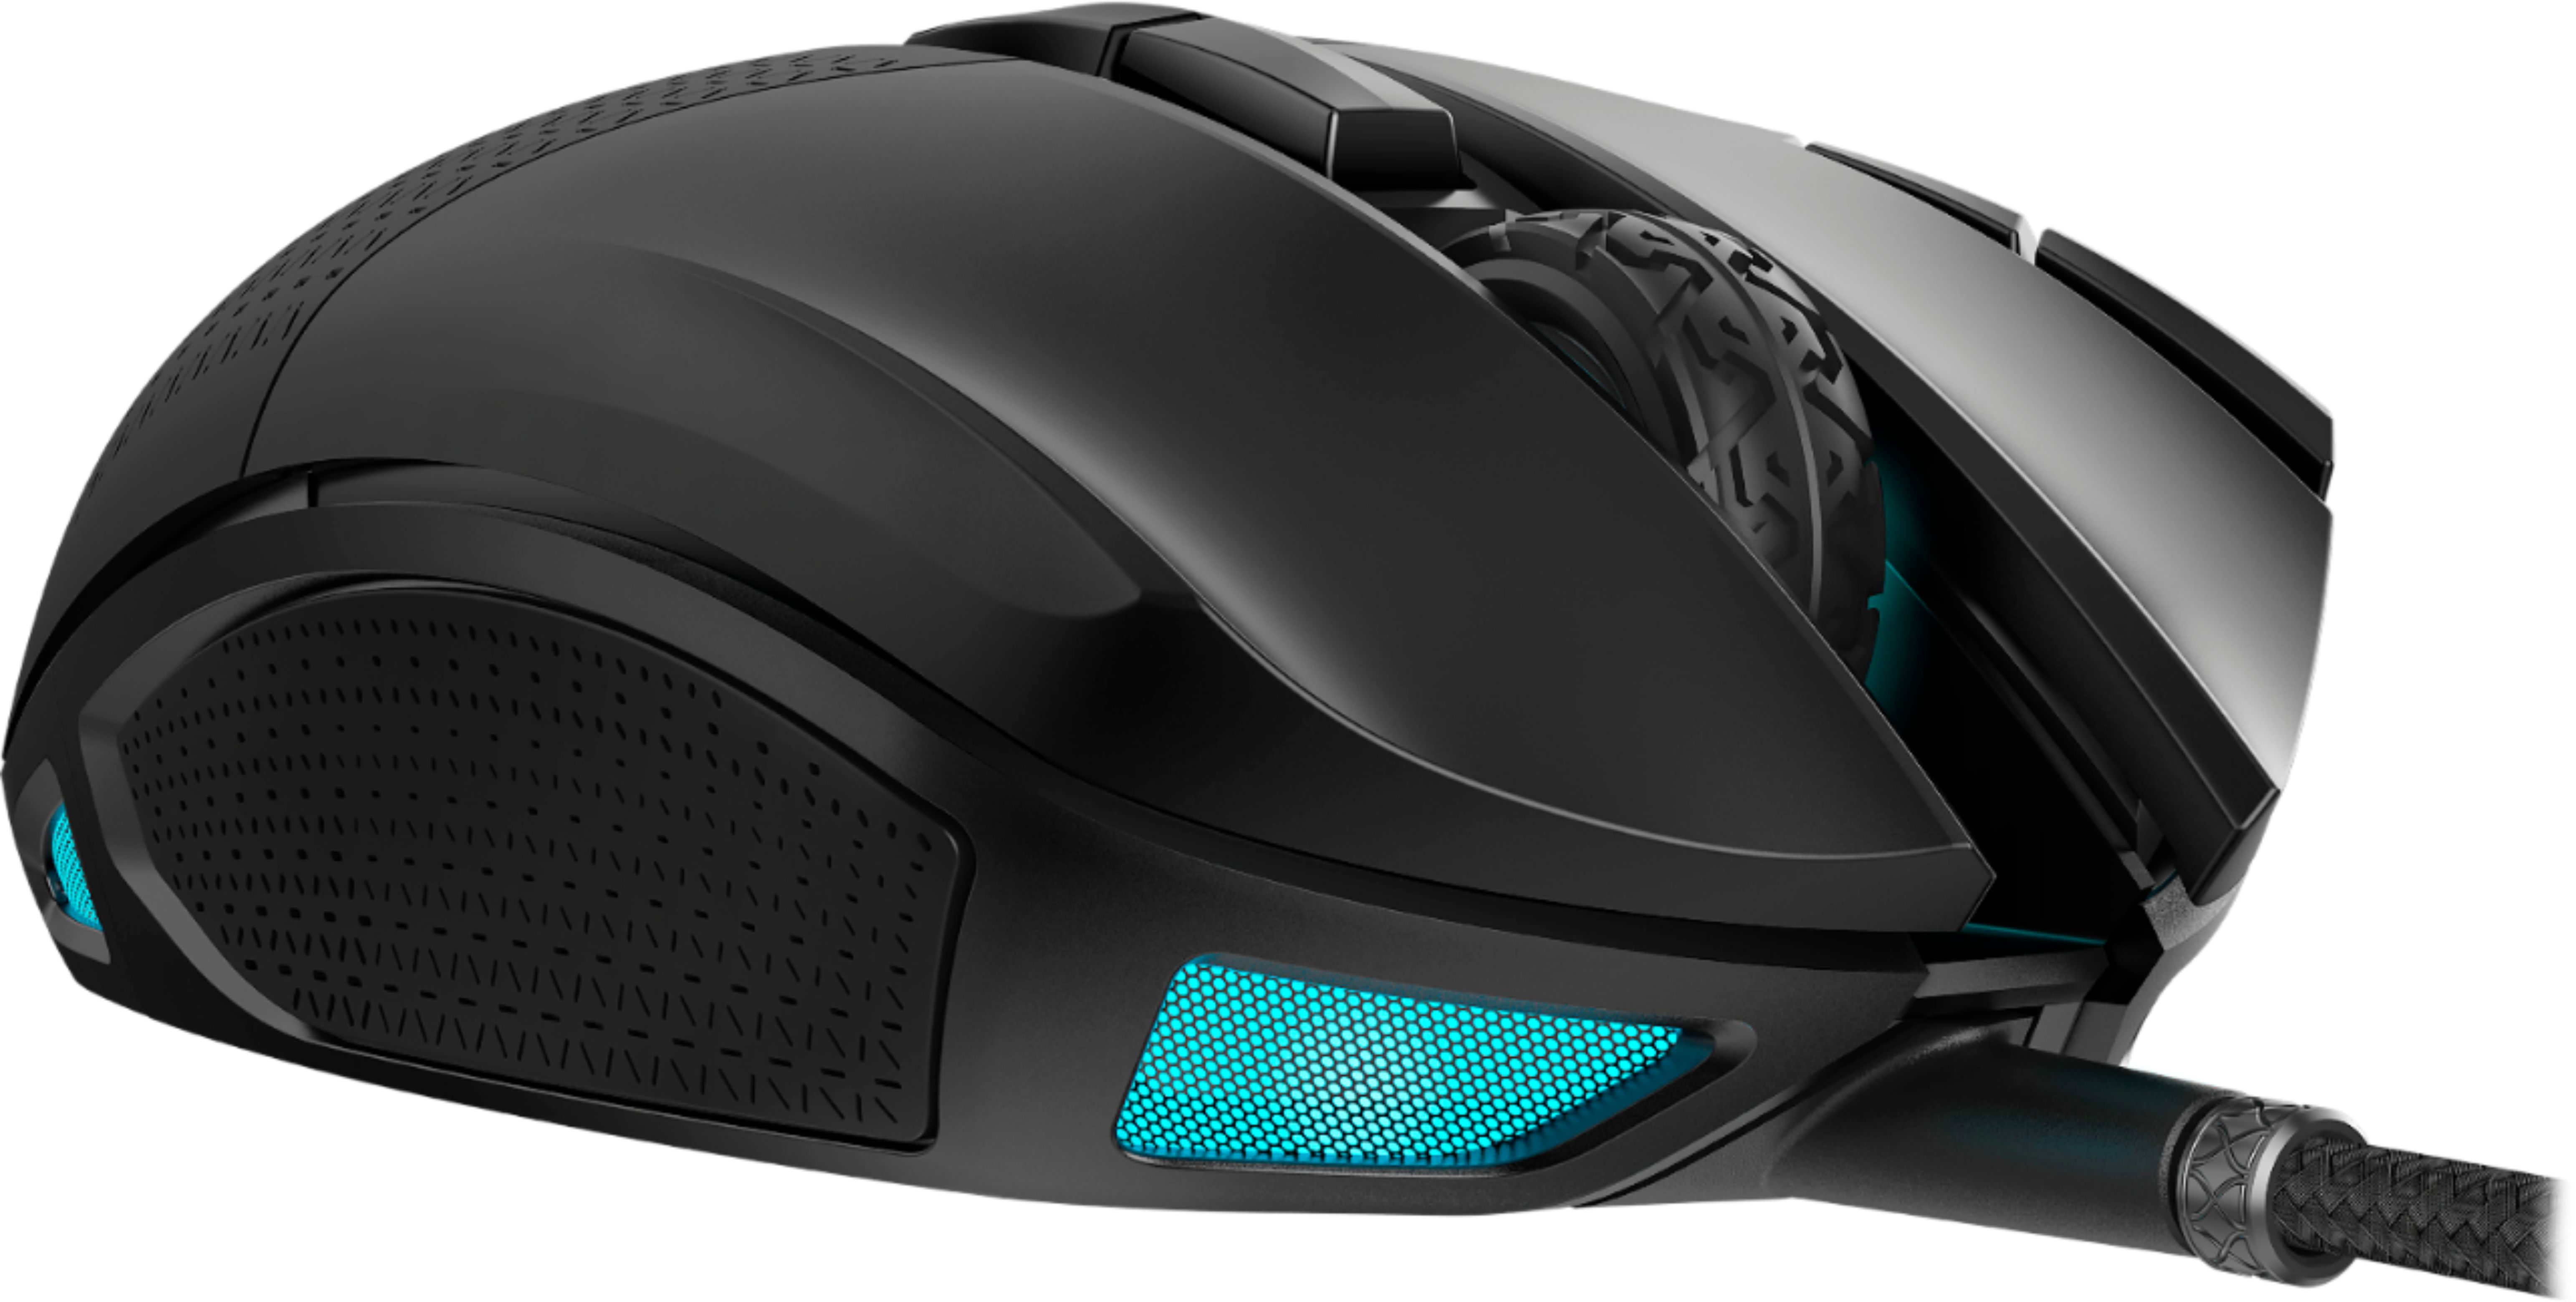 SOURIS GAMING LEGENDARY FILAIRE RGB BETTERPLAY